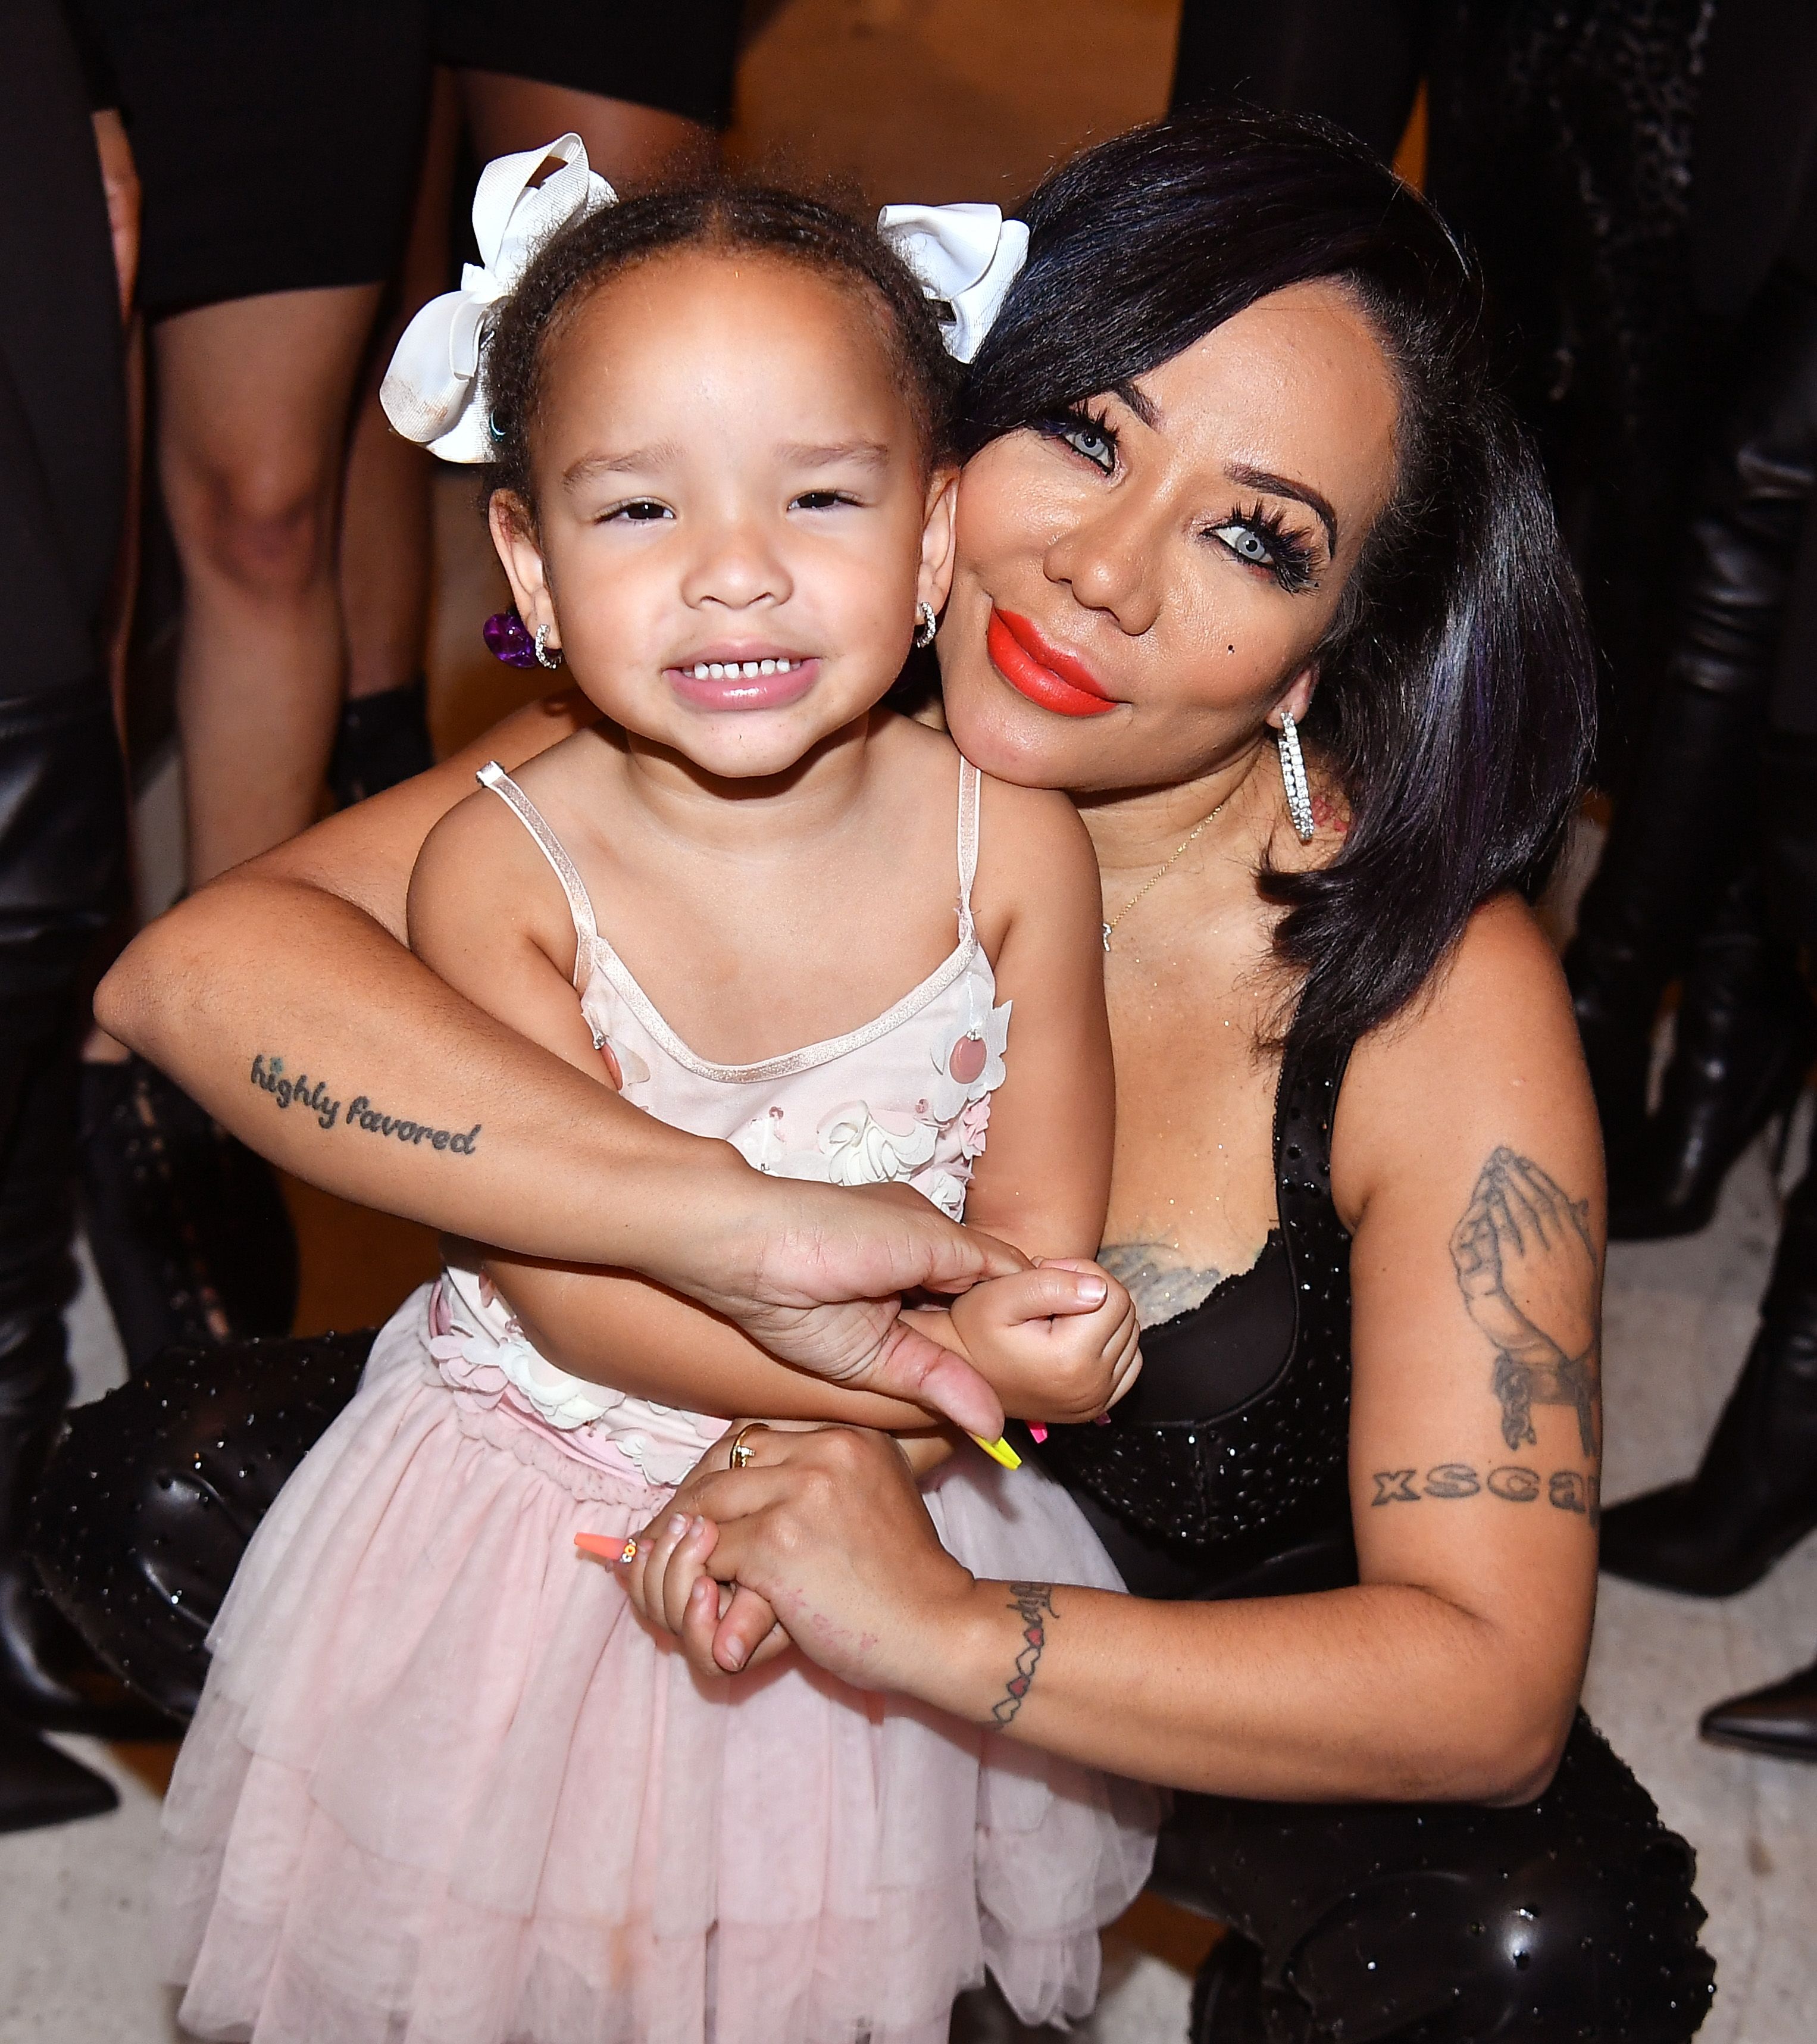 Tameka "Tiny" Harris with her daughter Heiress Diana Harris backstage during "Majic 107.5 After Dark" in 2019 in Atlanta, Georgia | Source: Getty Images